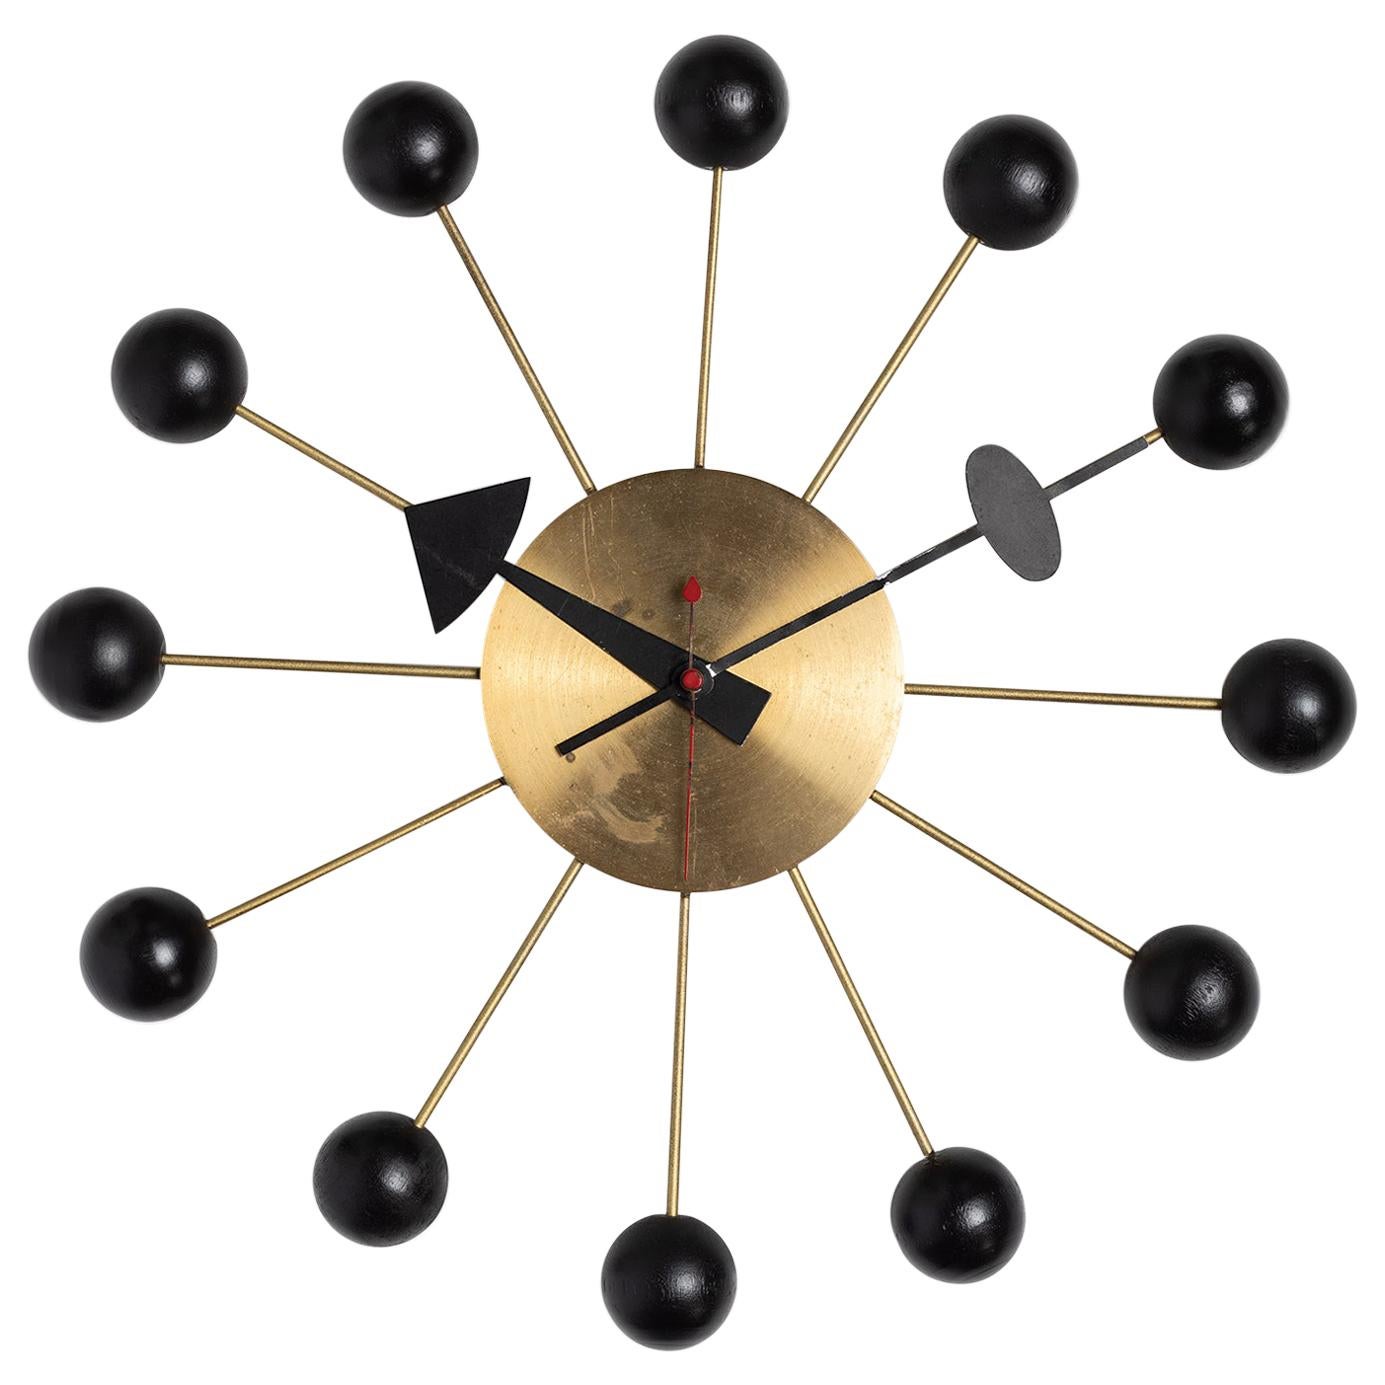 George Nelson Wall Clock